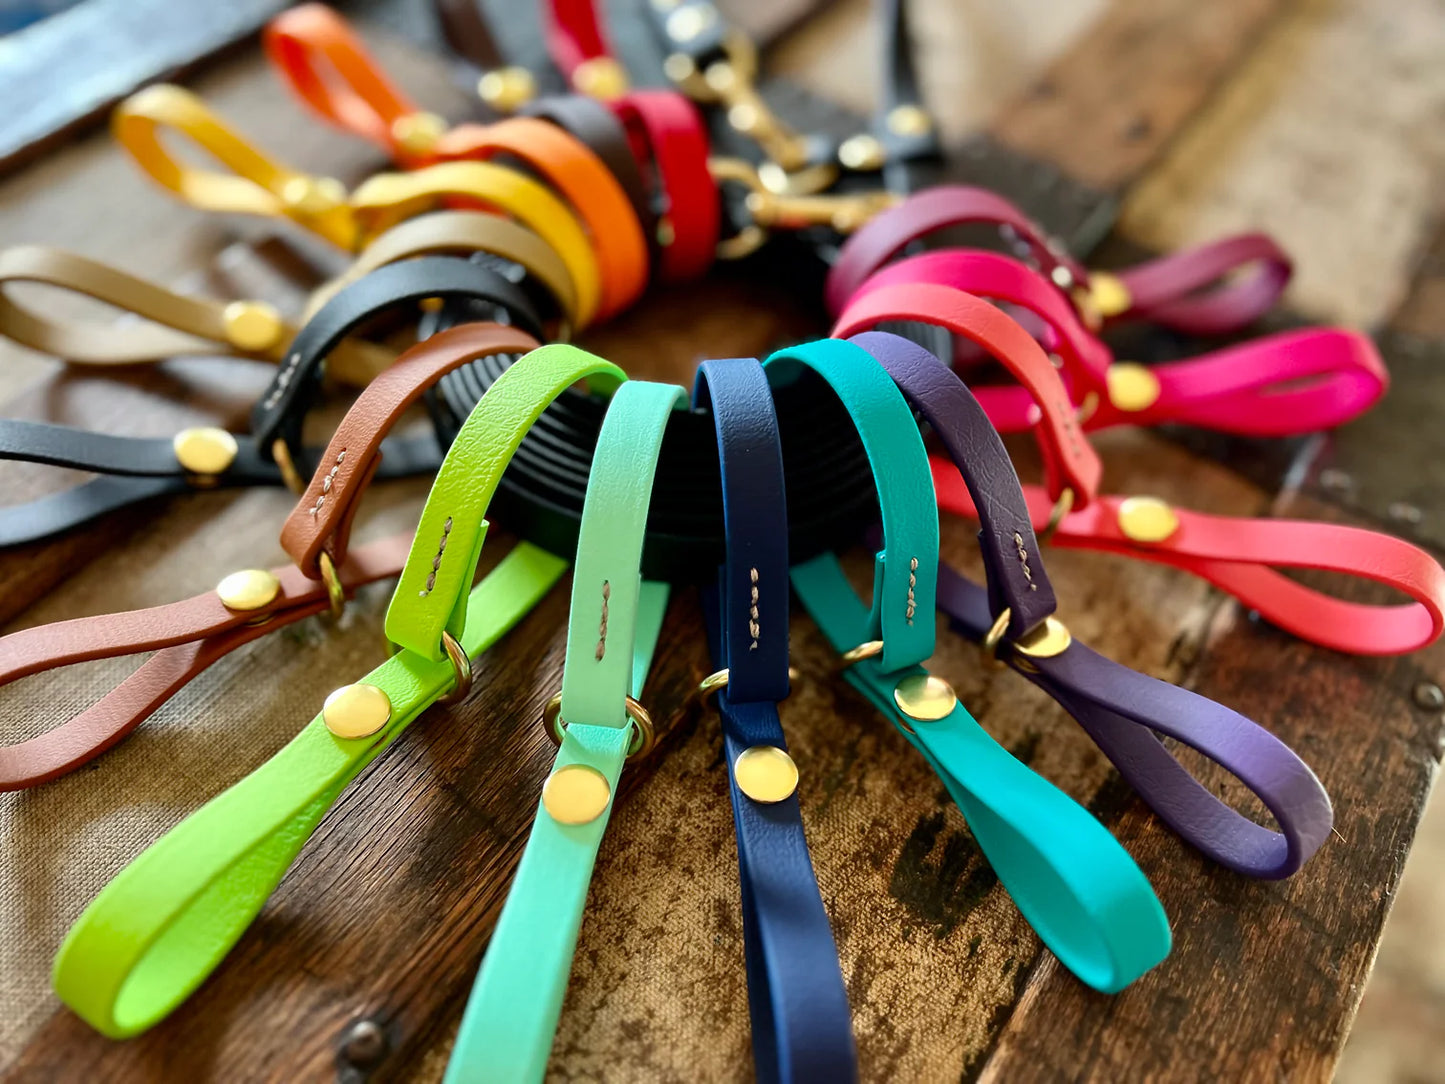 A group of colorful Trailblazing Tails: The Long Line Holder leashes, featuring snap closures, arranged on a wooden table.